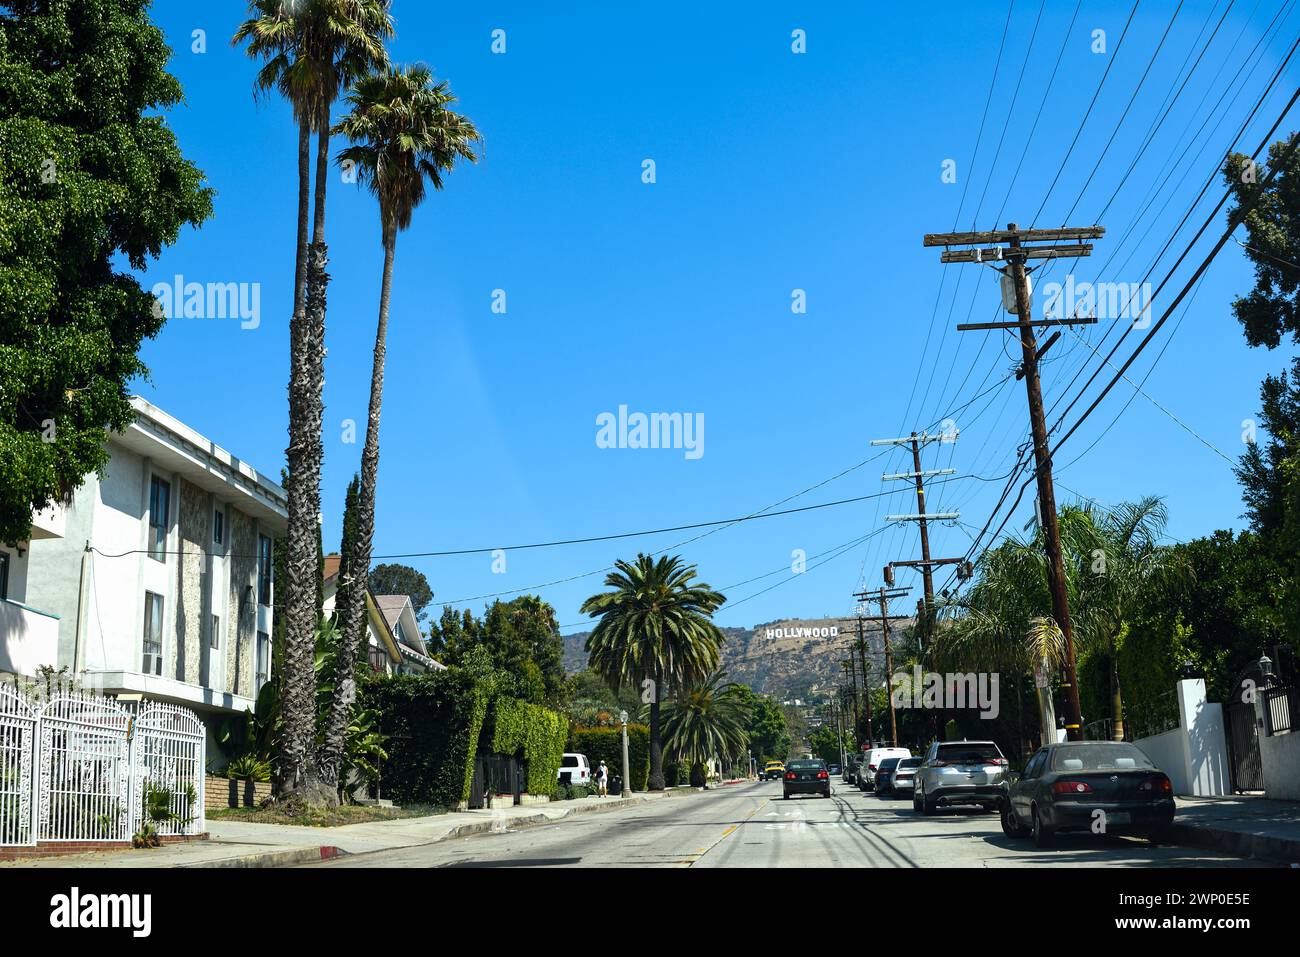 The Hollywood Sign seen from Beachwood Dr - Los Angeles, California Stock Photo